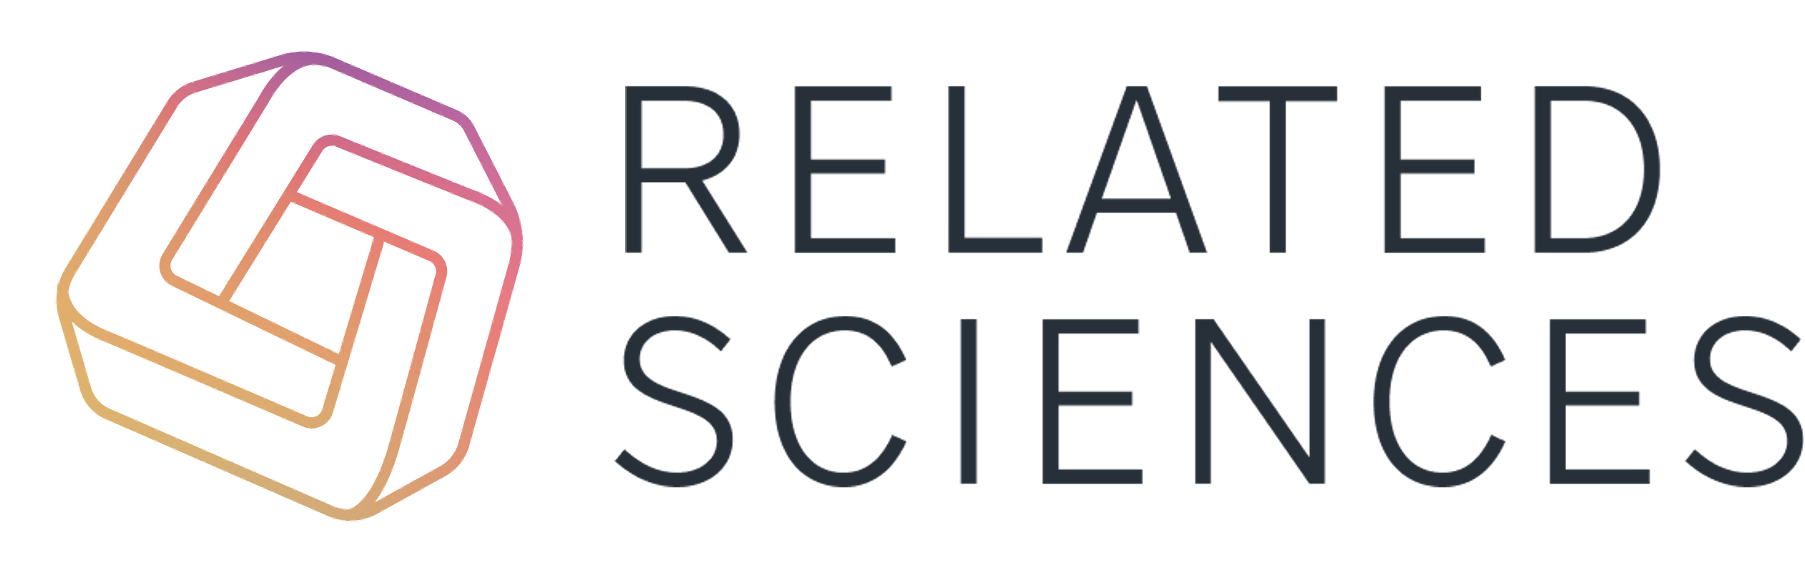 Related Sciences - Press Logo.png